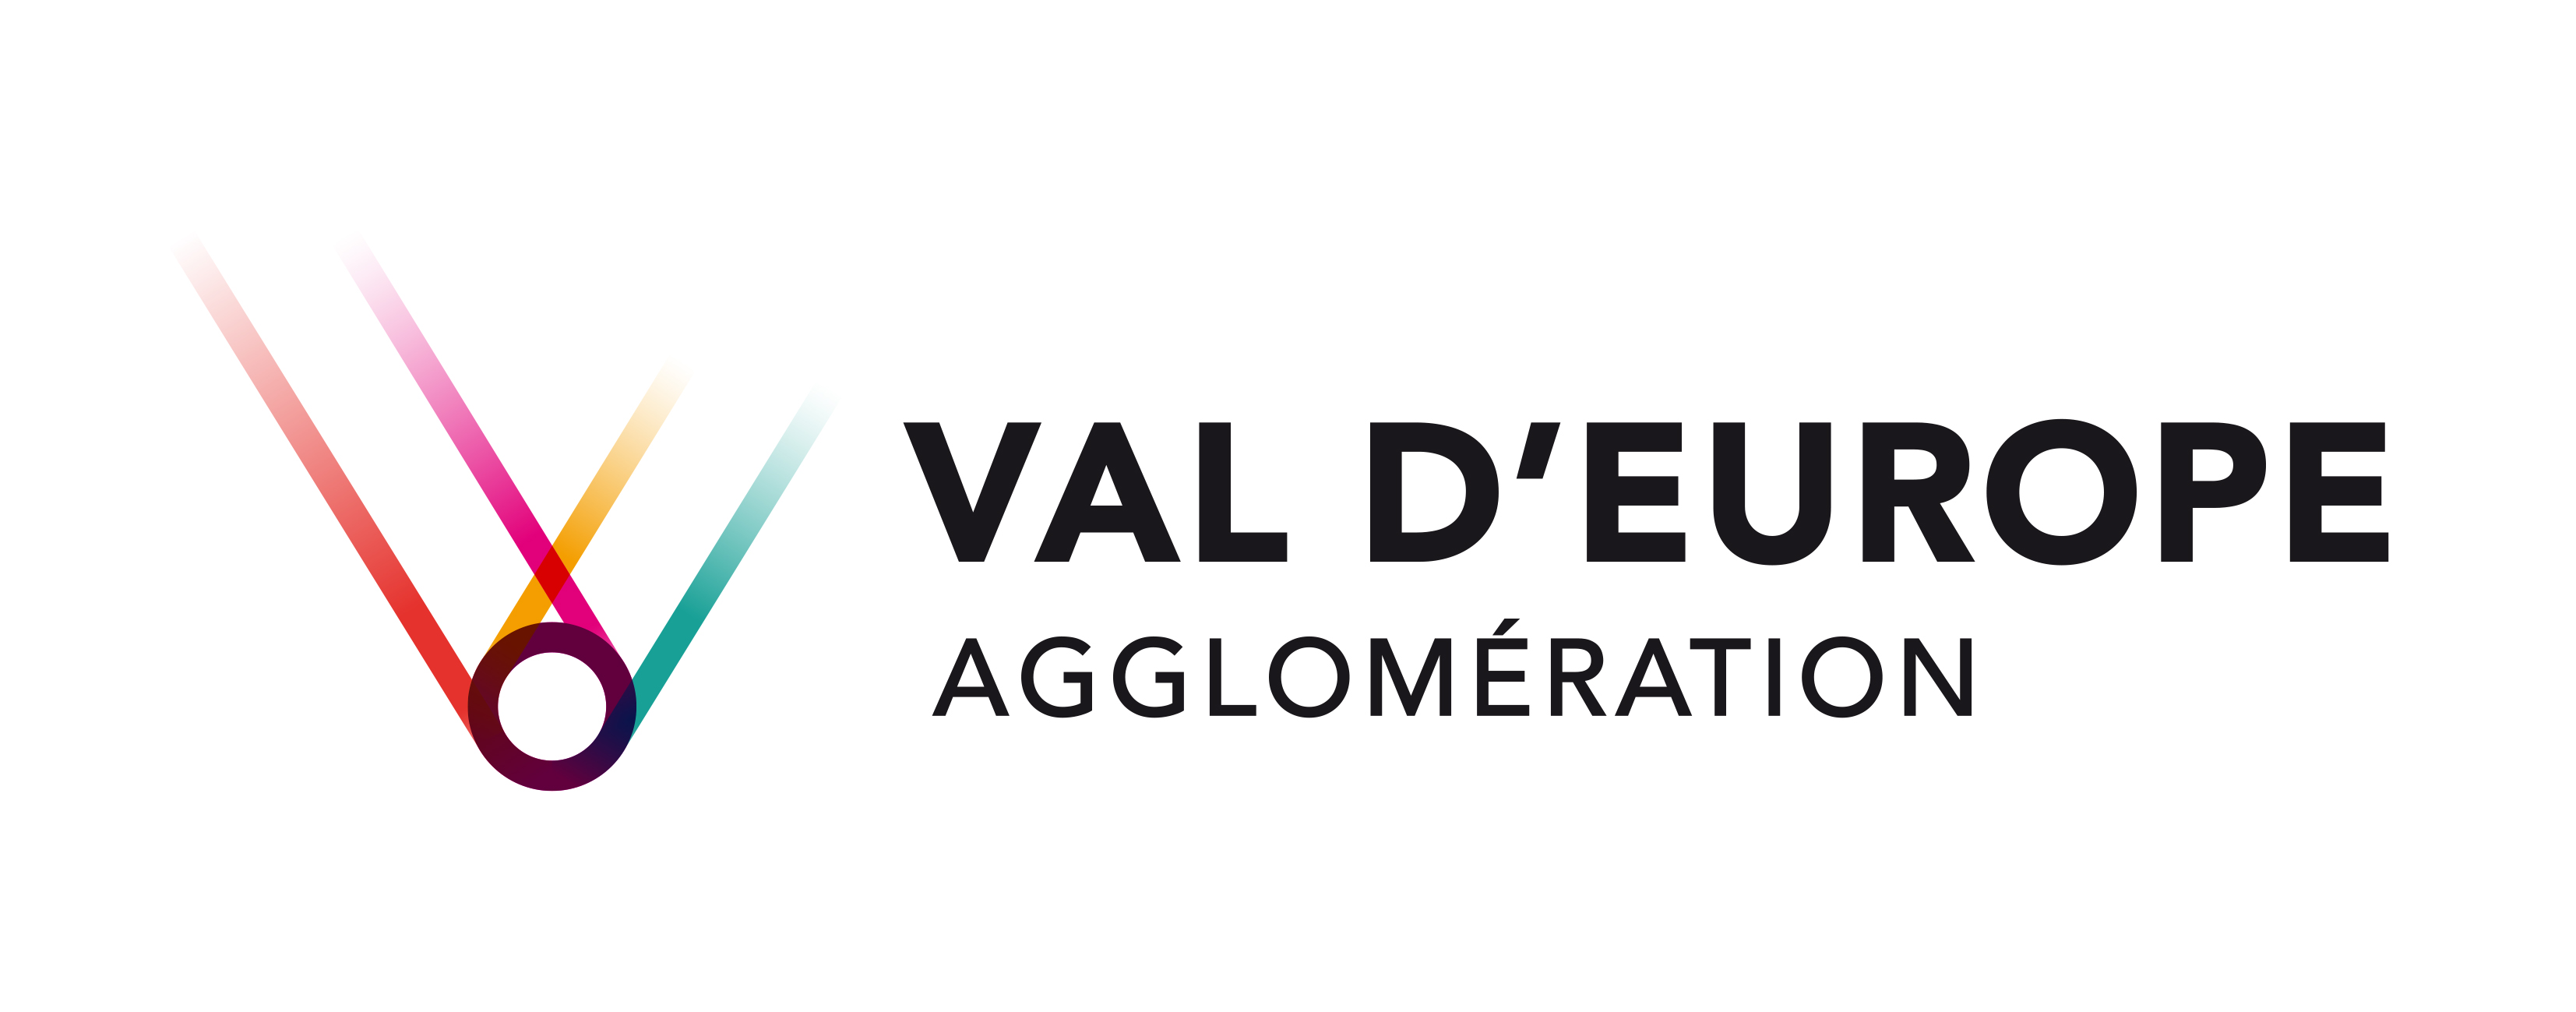 Val d'Europe agglomération